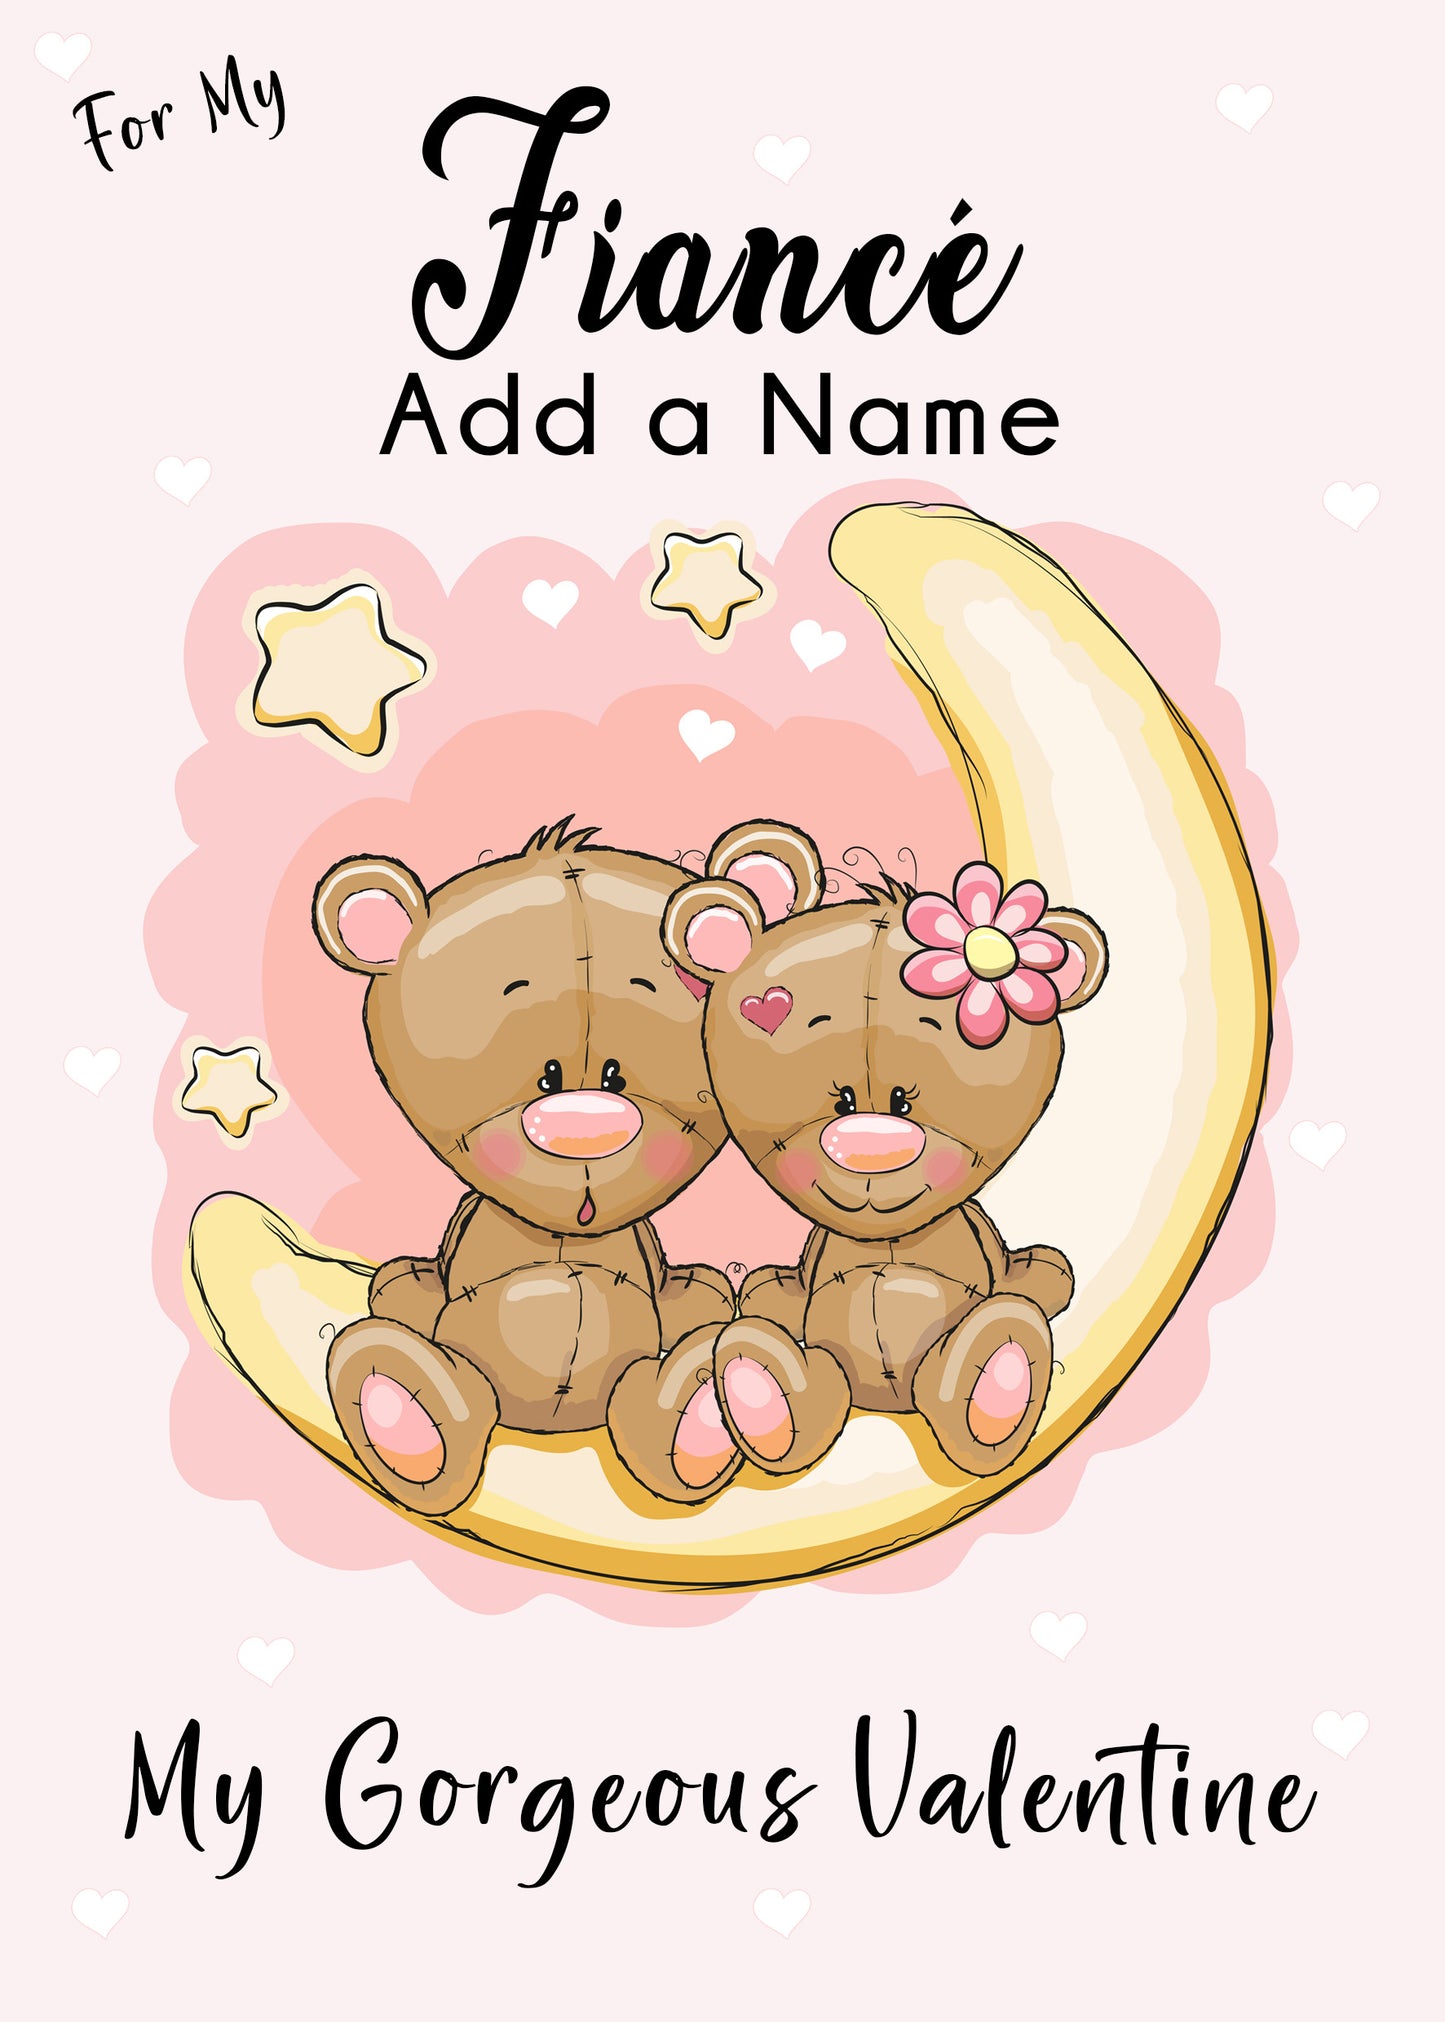 Personalised Fiancé Love Bears Valentine's Day Cards